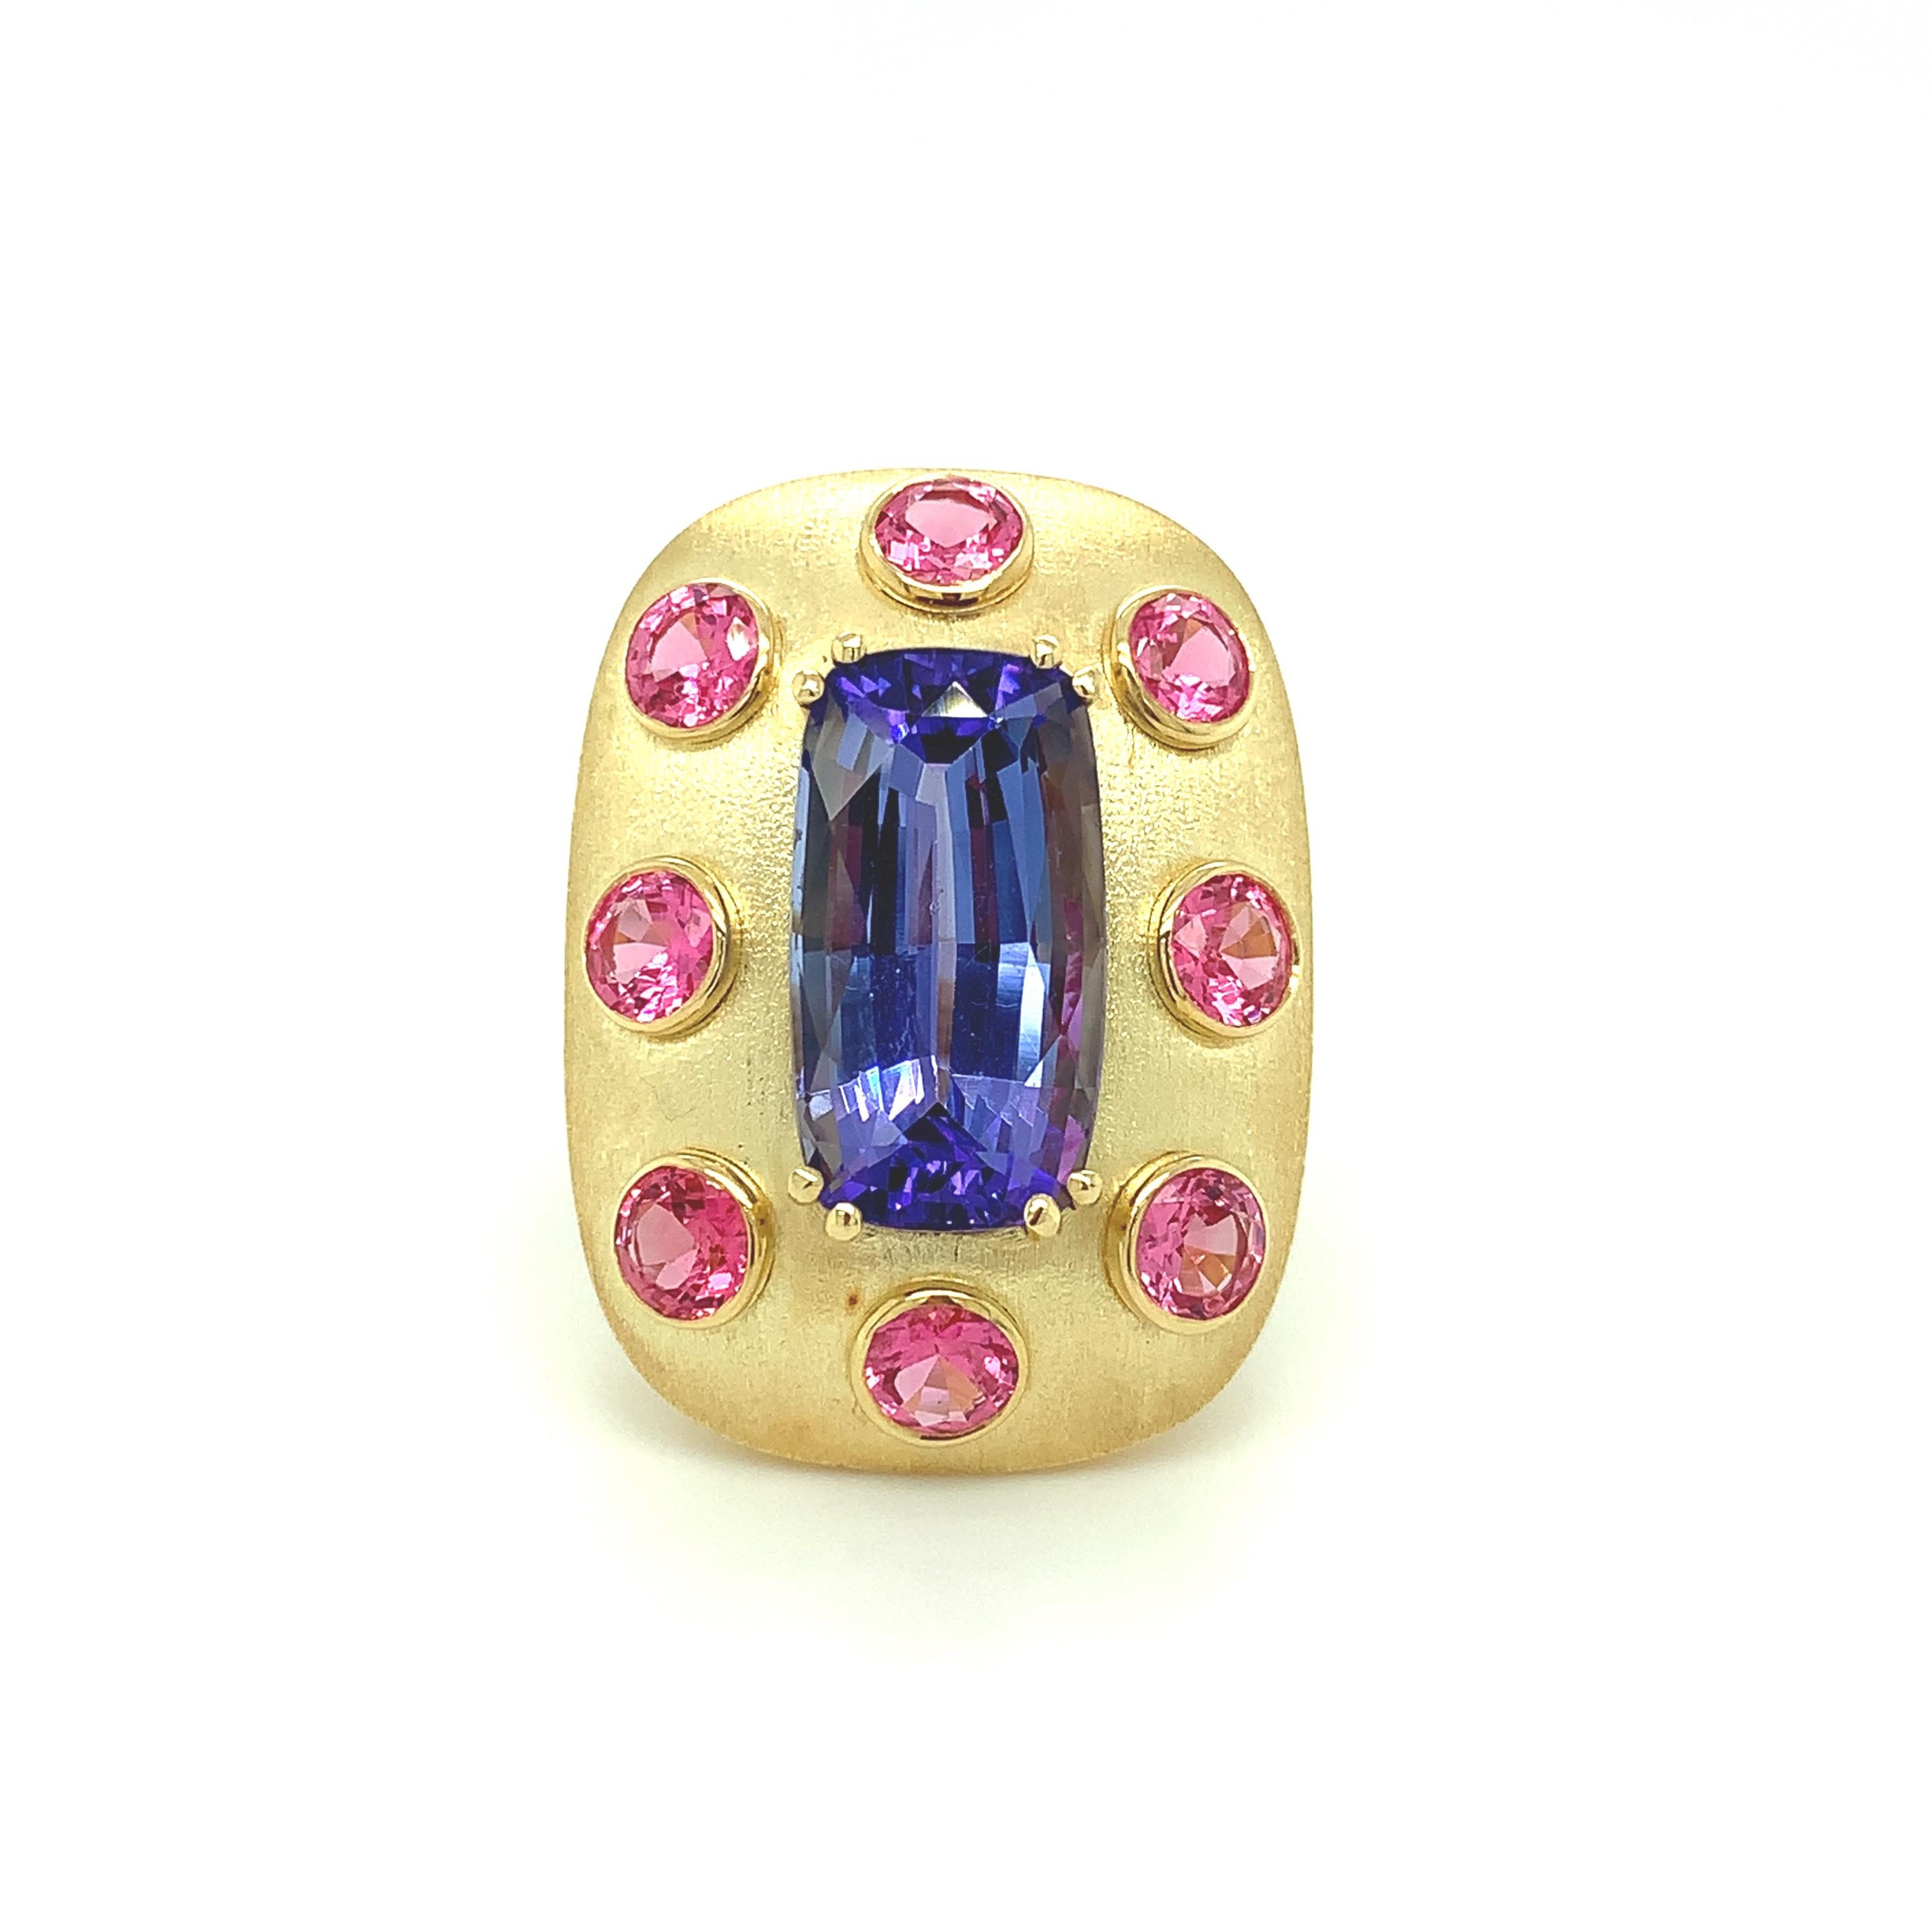 A beautiful, 8.61 carat cushion cut tanzanite and vivid, round pink spinels are set in this handmade 18k yellow gold ring. The tanzanite is a vibrant, lavender-blue color - a perfect complement to the bright, fuchsia-pink spinels! This ring was